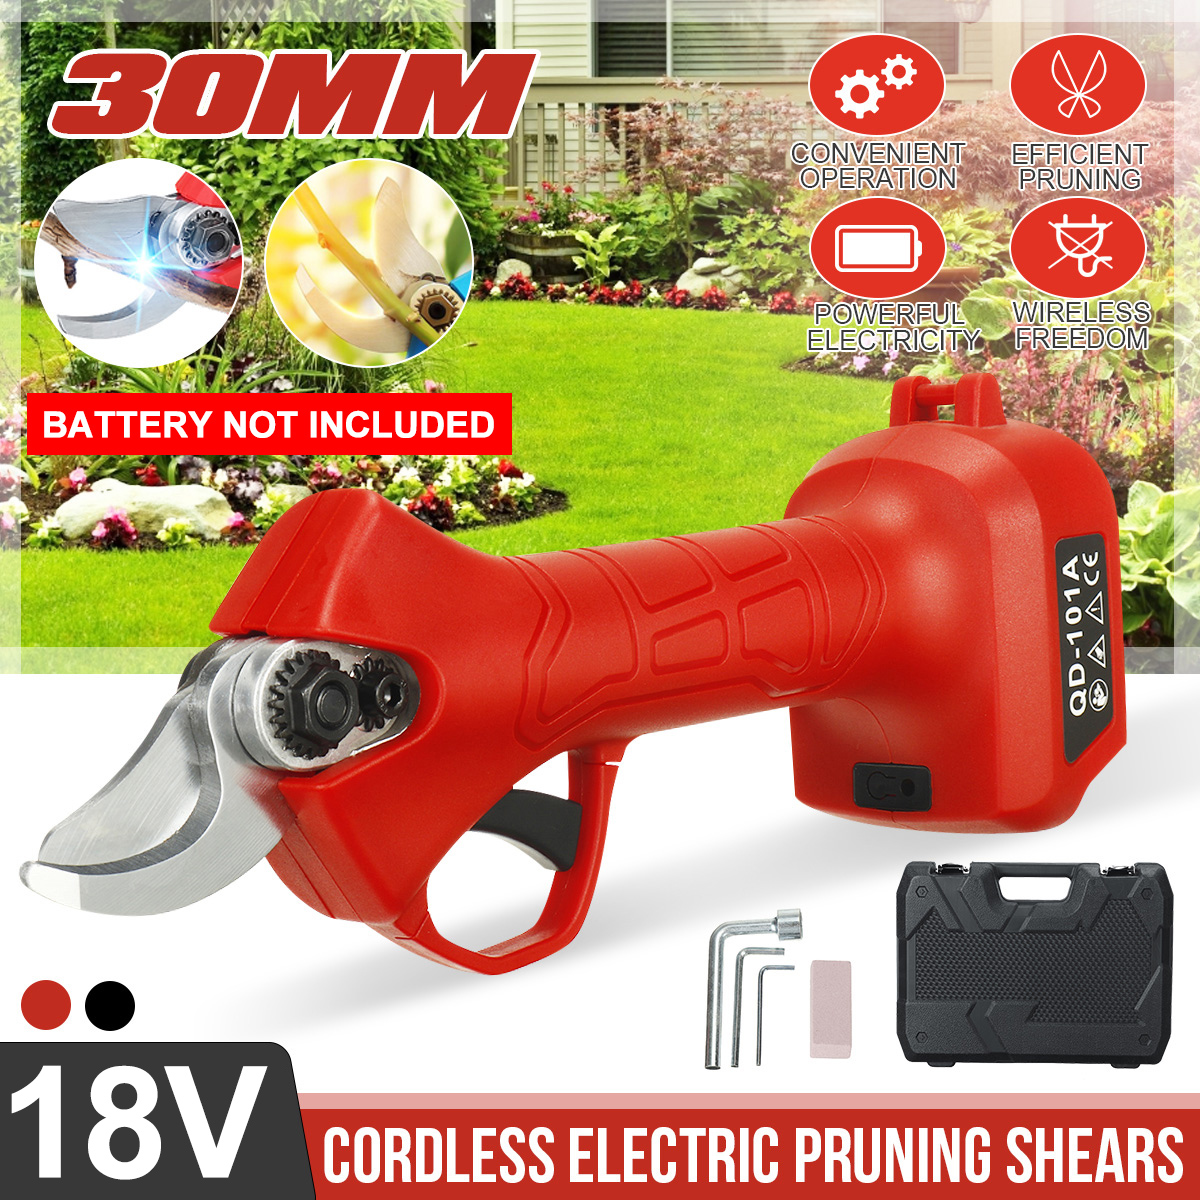 30mm-Cordless-Electric-Pruning-Shears-Liion-Battery-Leaves-Trimmer-Garden-Power-Tool-Fit-Makita-1885465-1